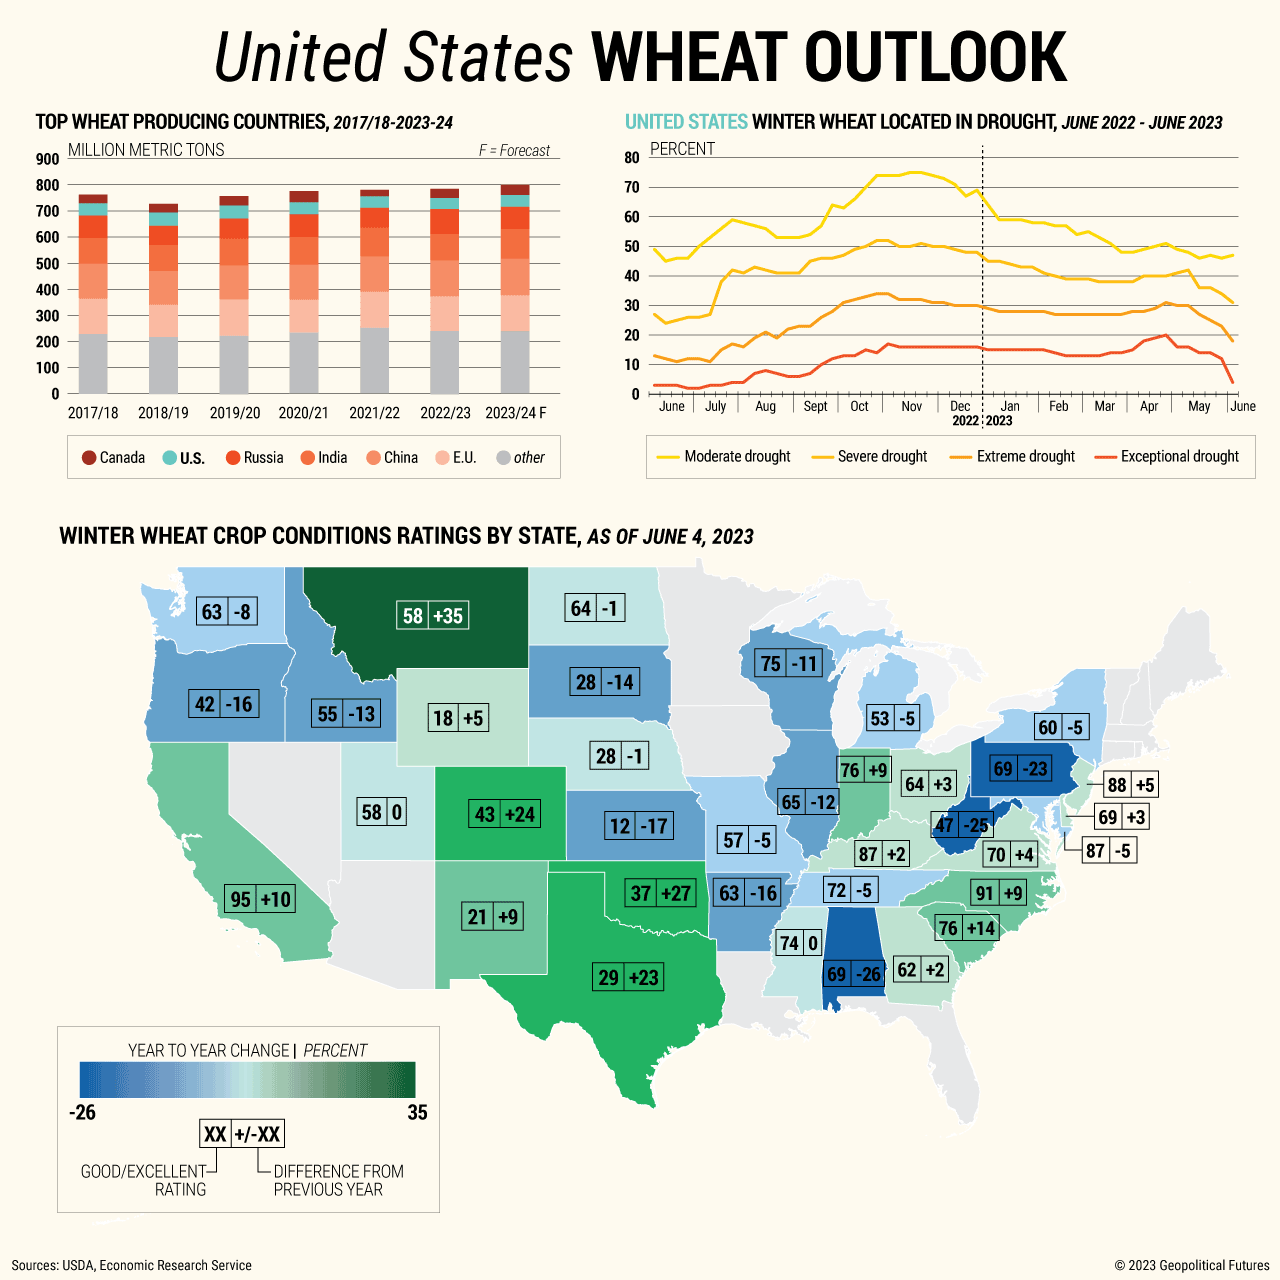 United States Wheat Outlook